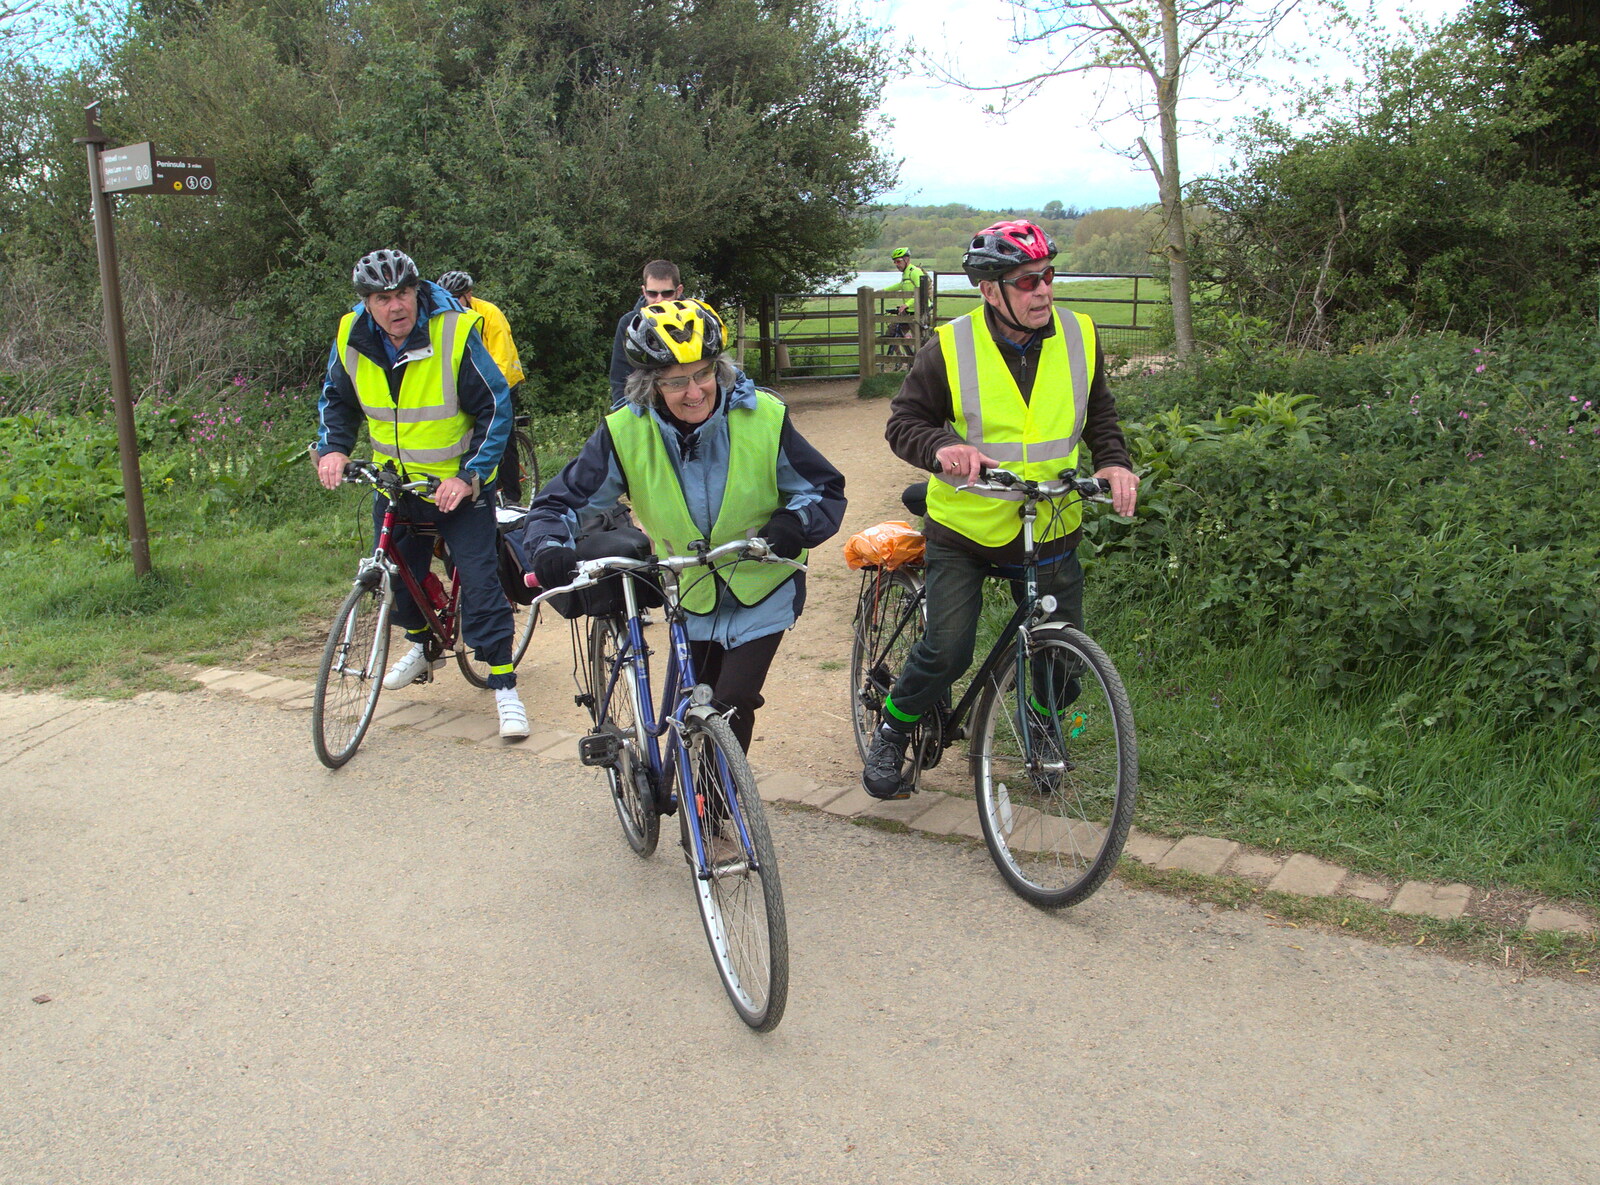 Alan, Jill and Colin set off again from The BSCC Weekend Away, Lyddington, Rutland - 9th May 2015